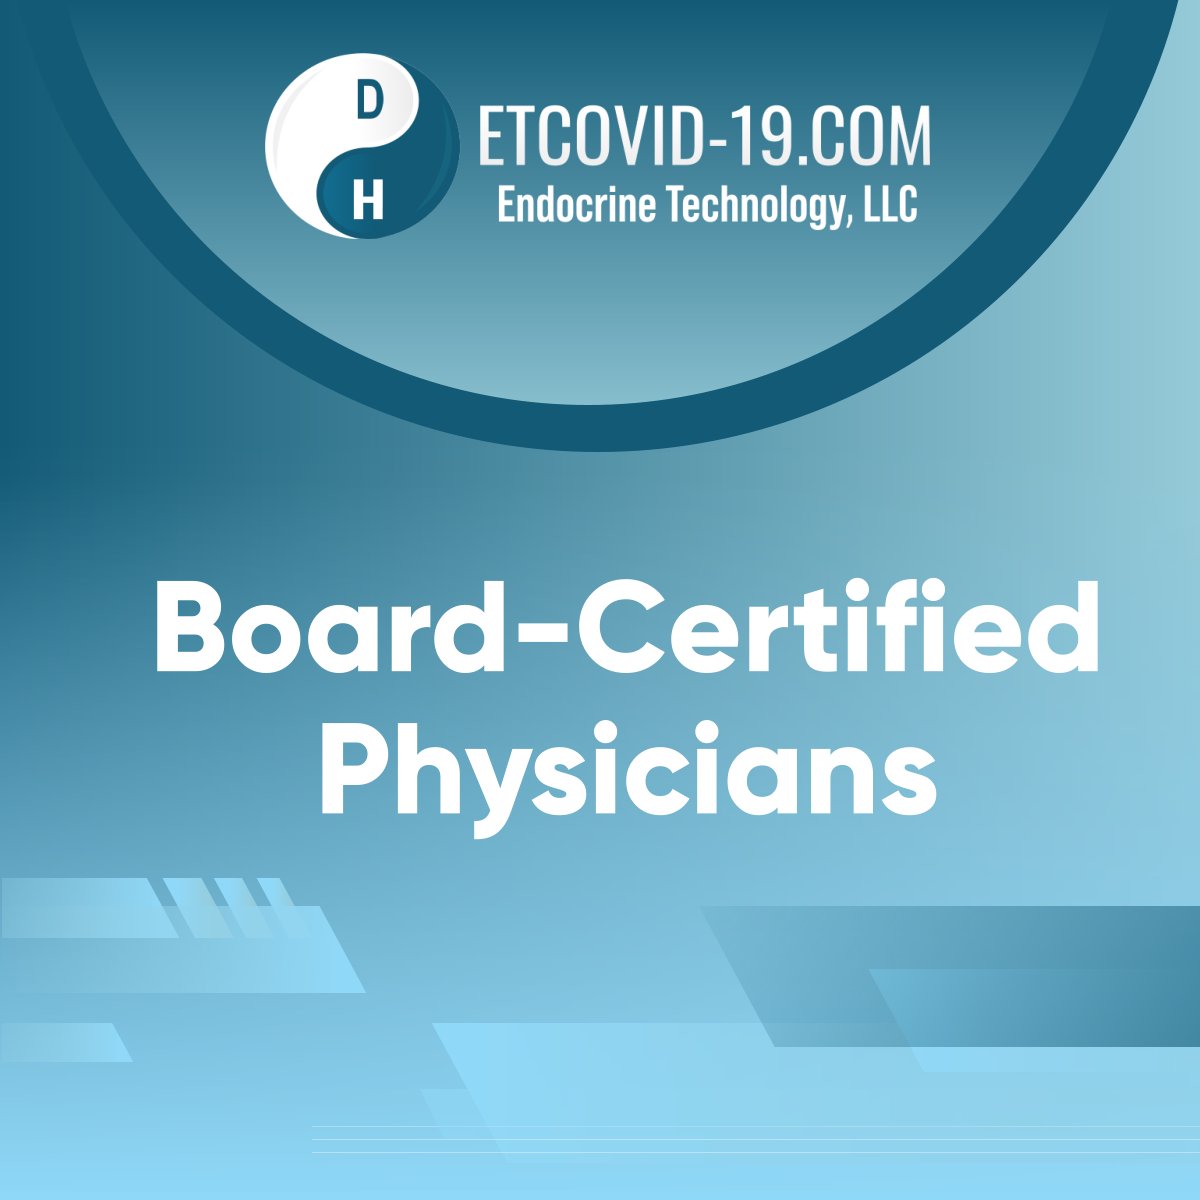 We have a team of board-certified physicians who are always ready and willing to help resolve your health issues. So that you will be able to live a healthier and longer life.

#HealthcareConsulting #BrooklynNY #CertifiedPhysicians #HealthIssues #EndocrineTechnologyLLC